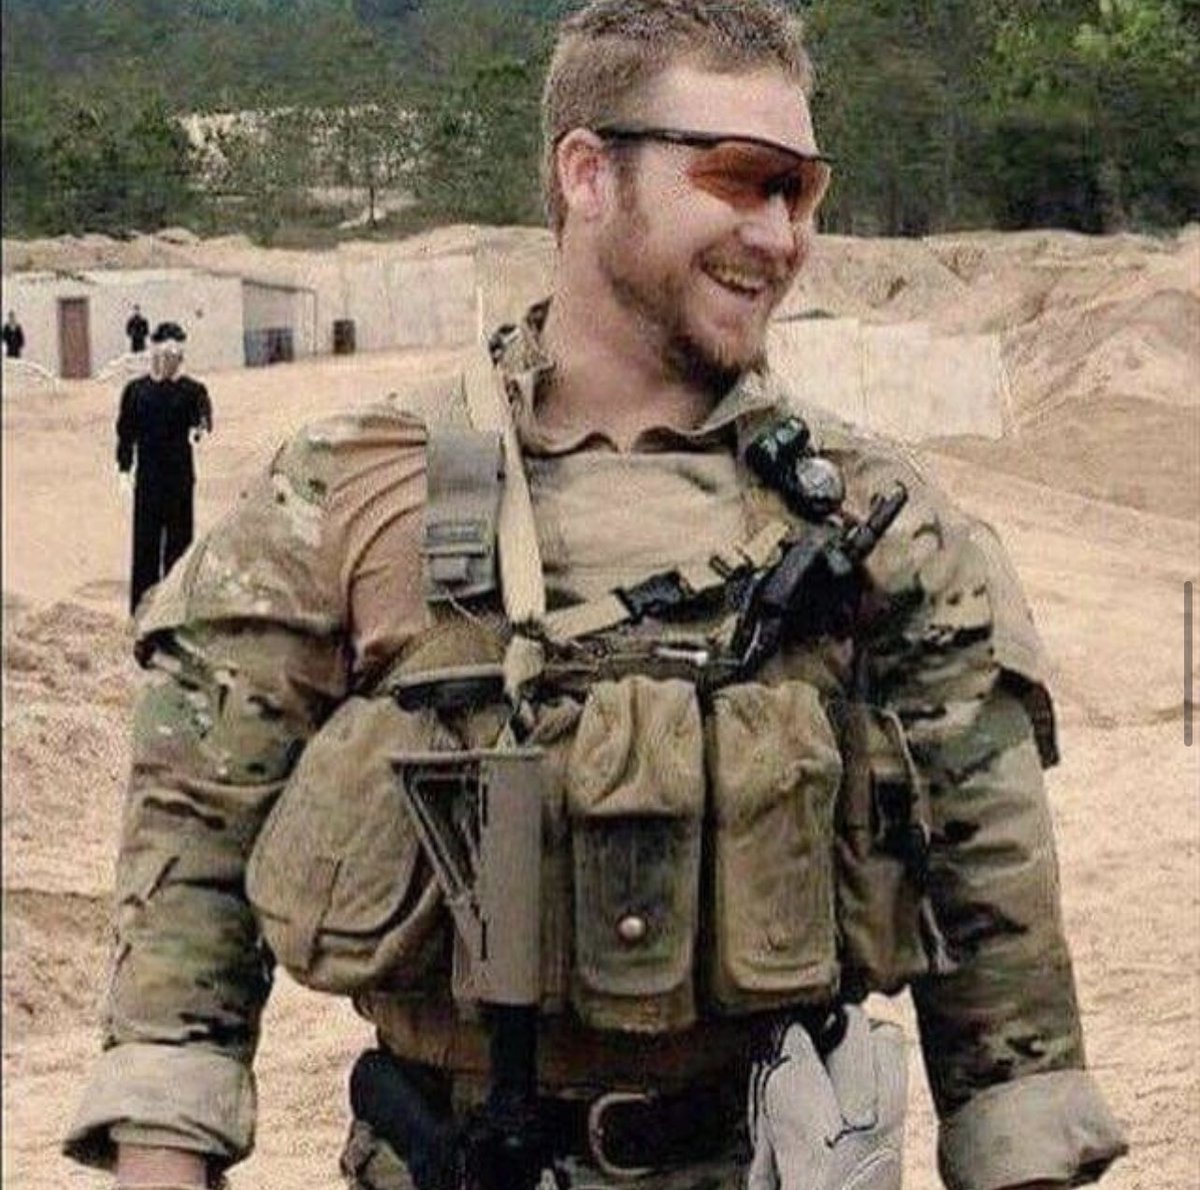 Never forget the Devil of Ramadi. Rest Easy Hero 🇺🇸